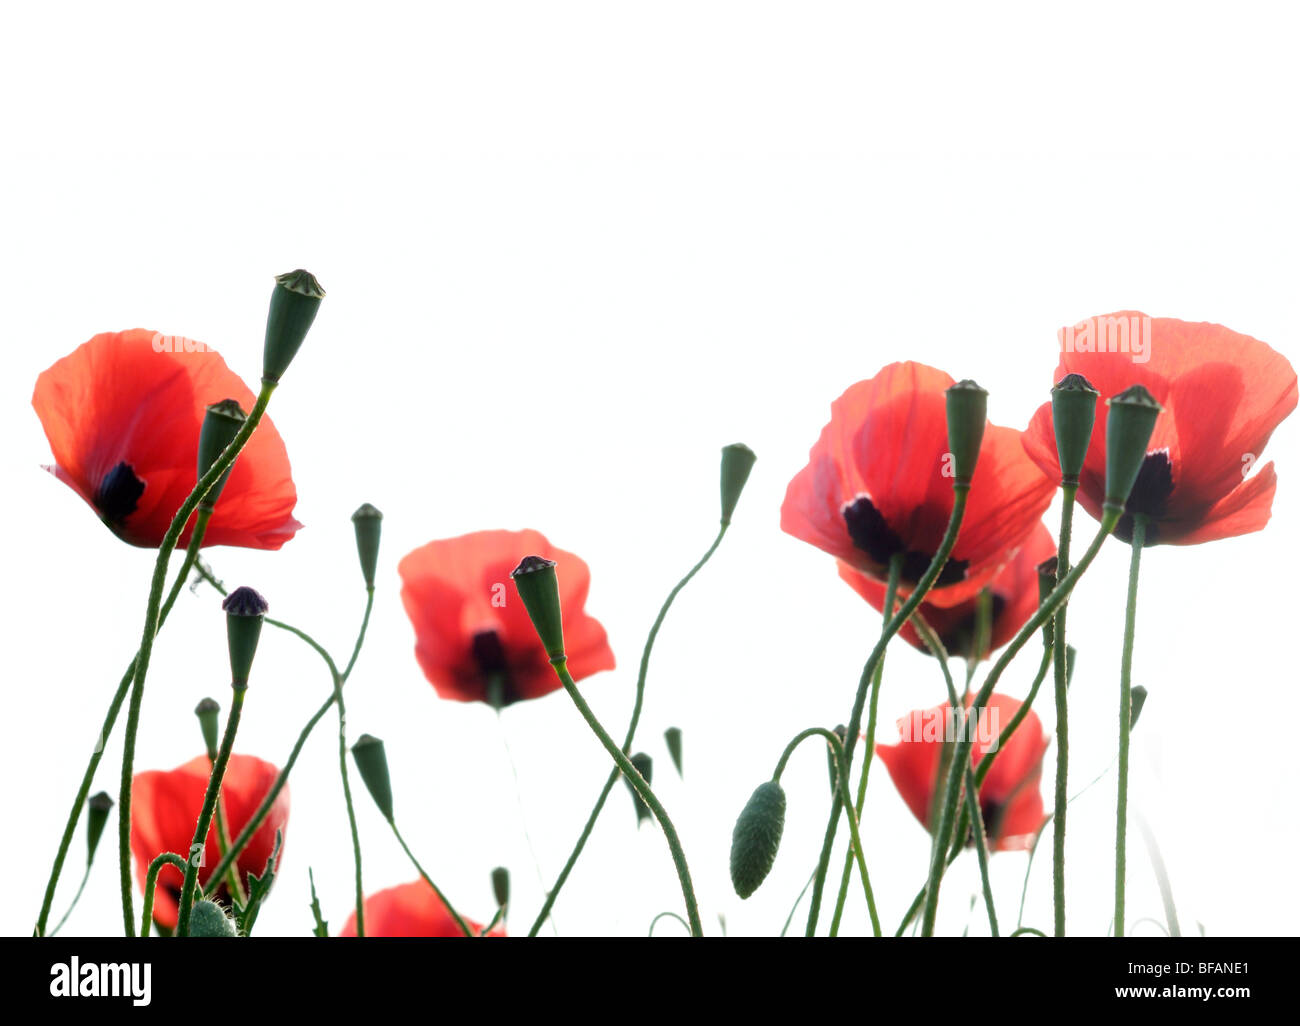 Israel, a field of red poppies Papaver umbonatum Stock Photo